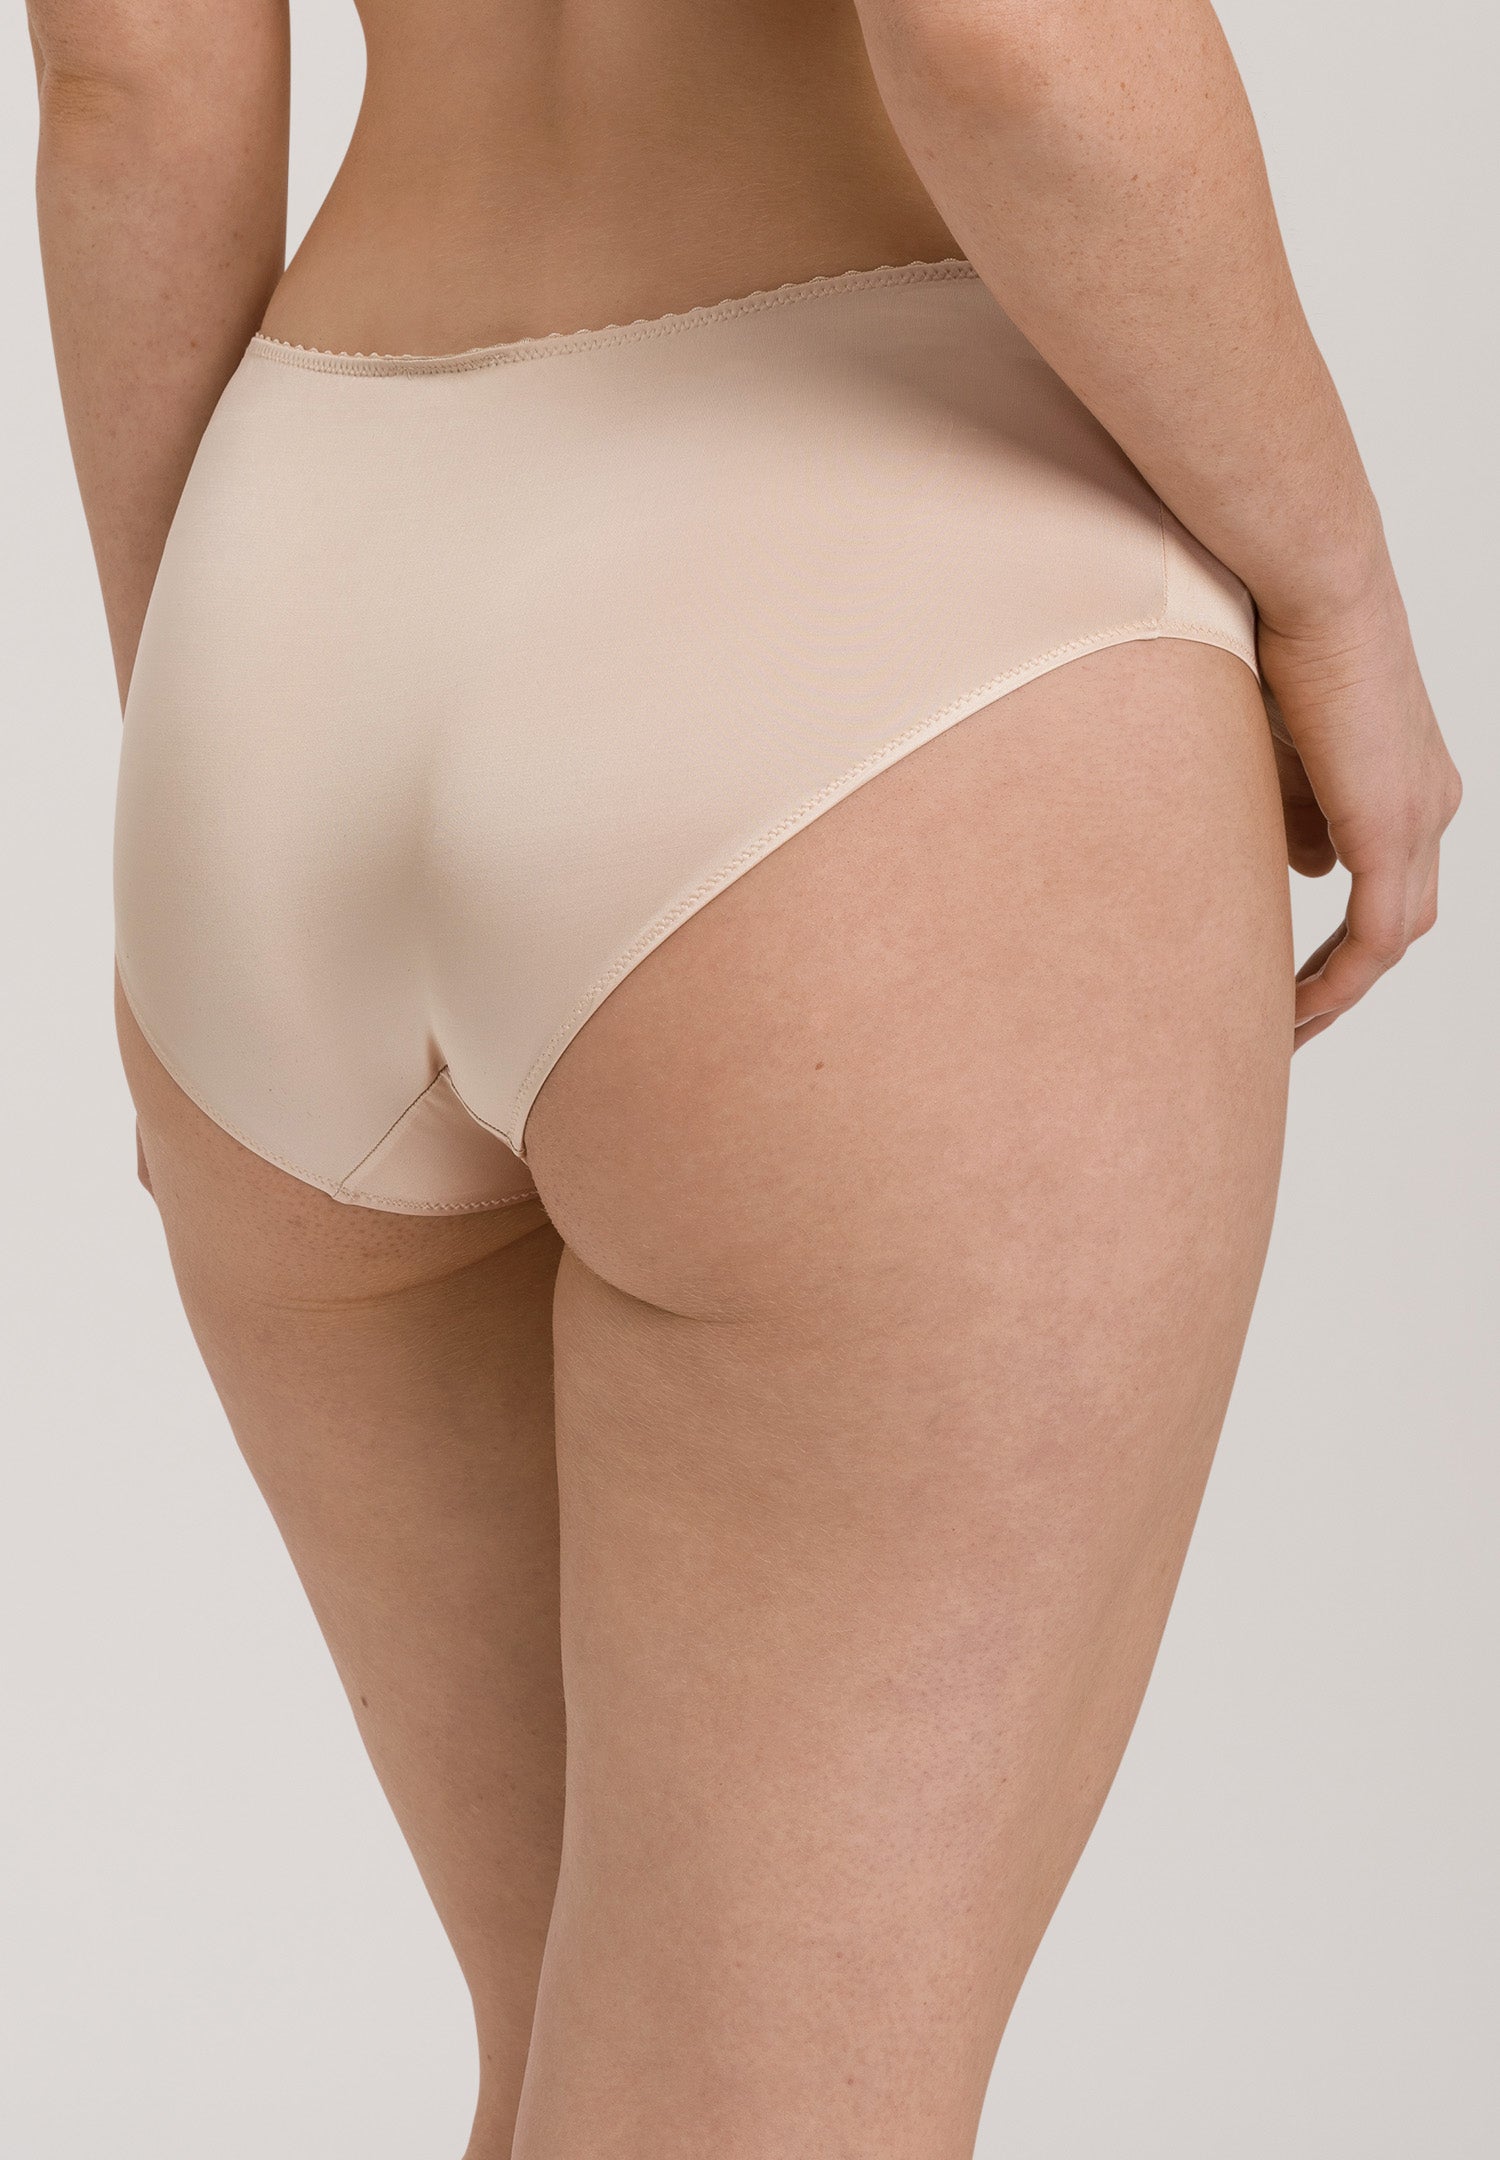 71061 Satin Deluxe Hipster - 858 Natural